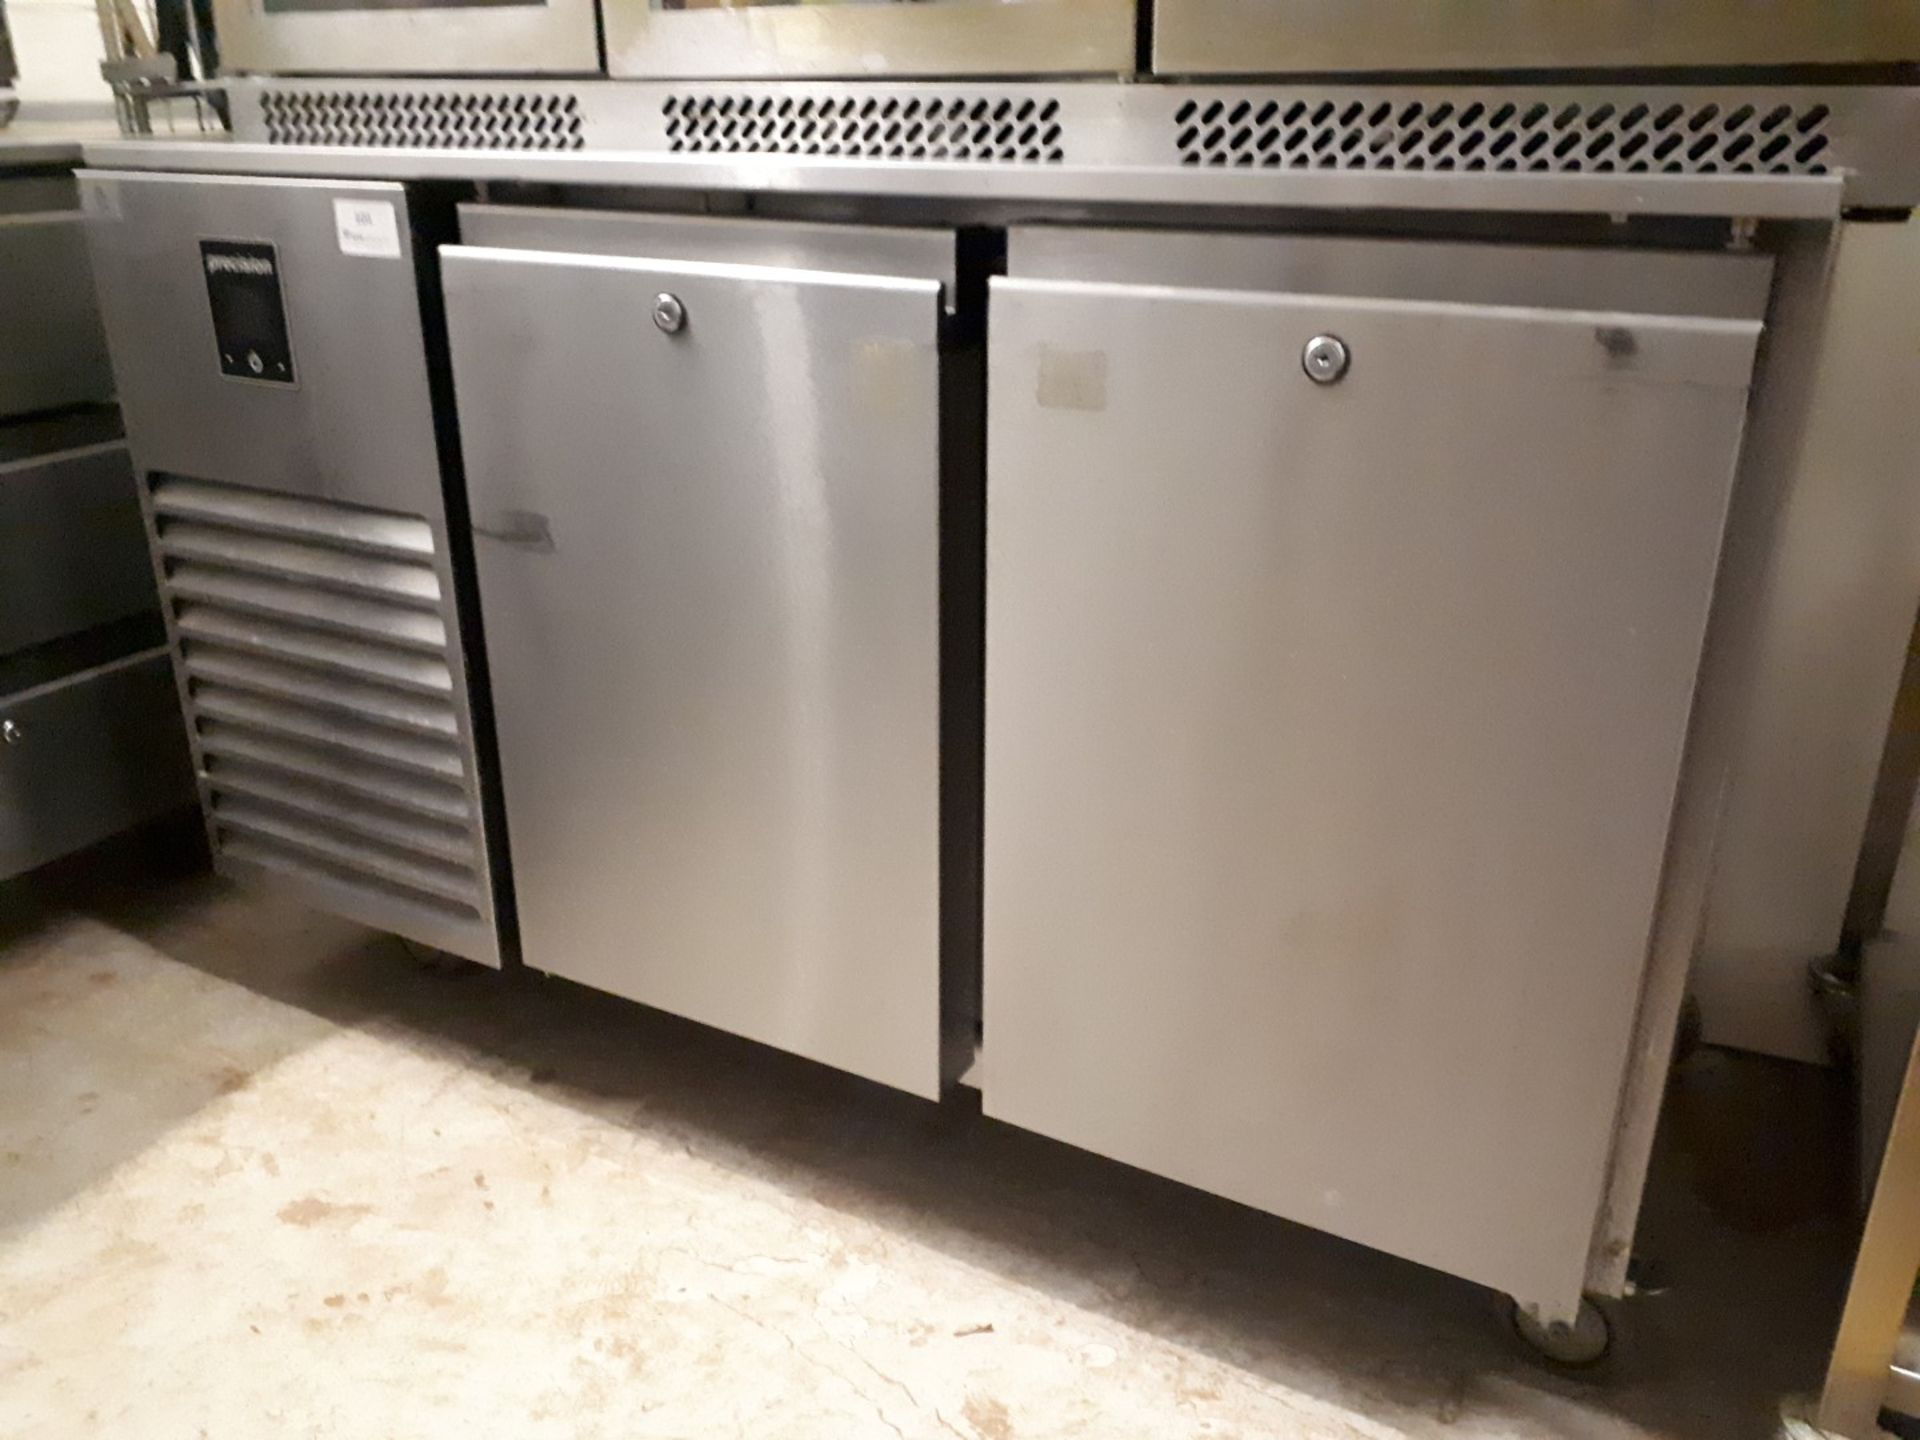 Precision MCU 211 Stainless Steel Two Door Counter Fridge - Image 2 of 4